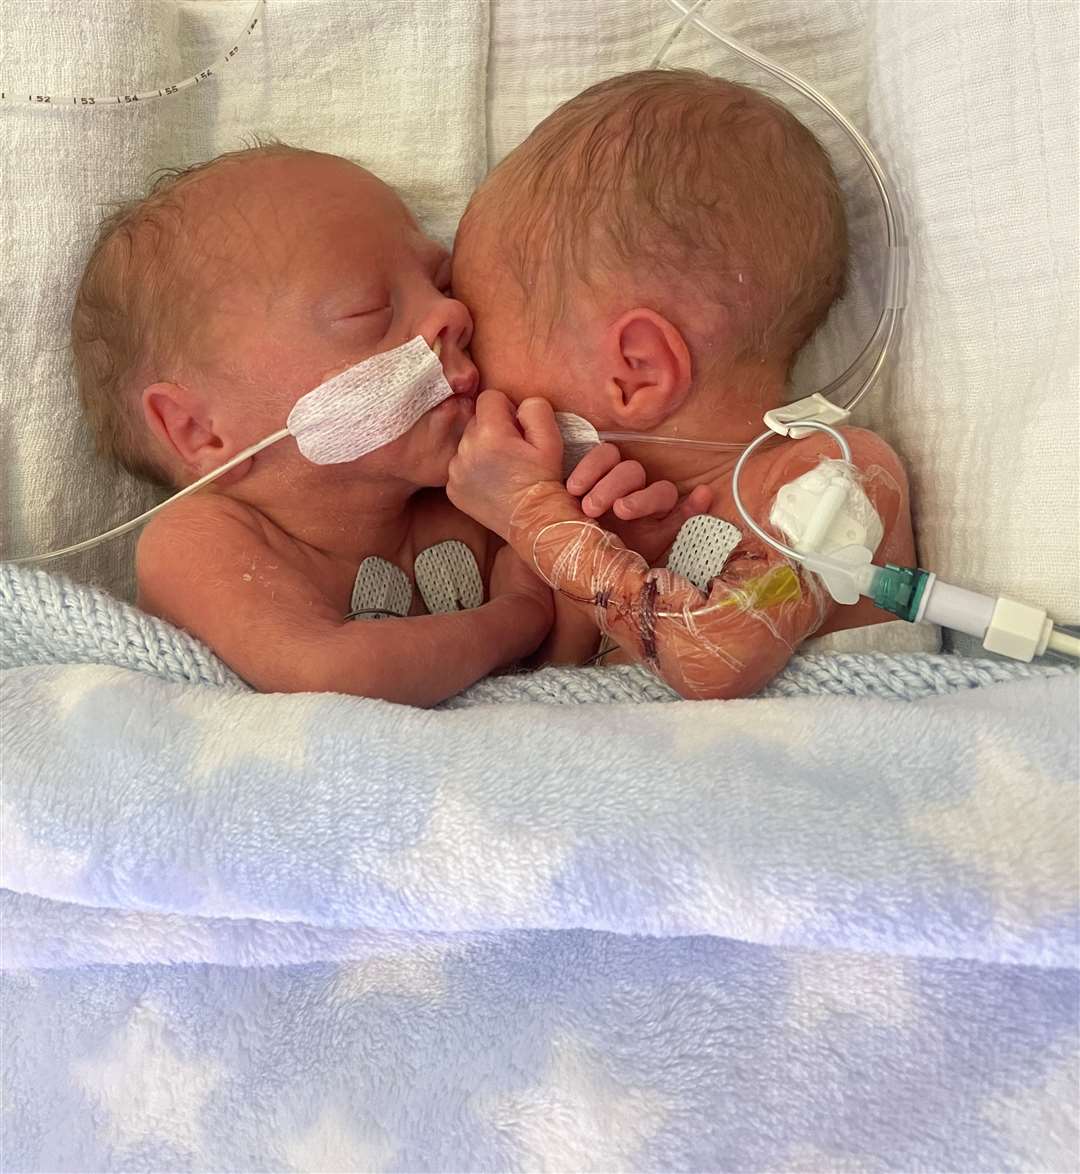 Gem and Wylder Chapman, from Margate, were born on May 12 at Medway Maritime Hospital